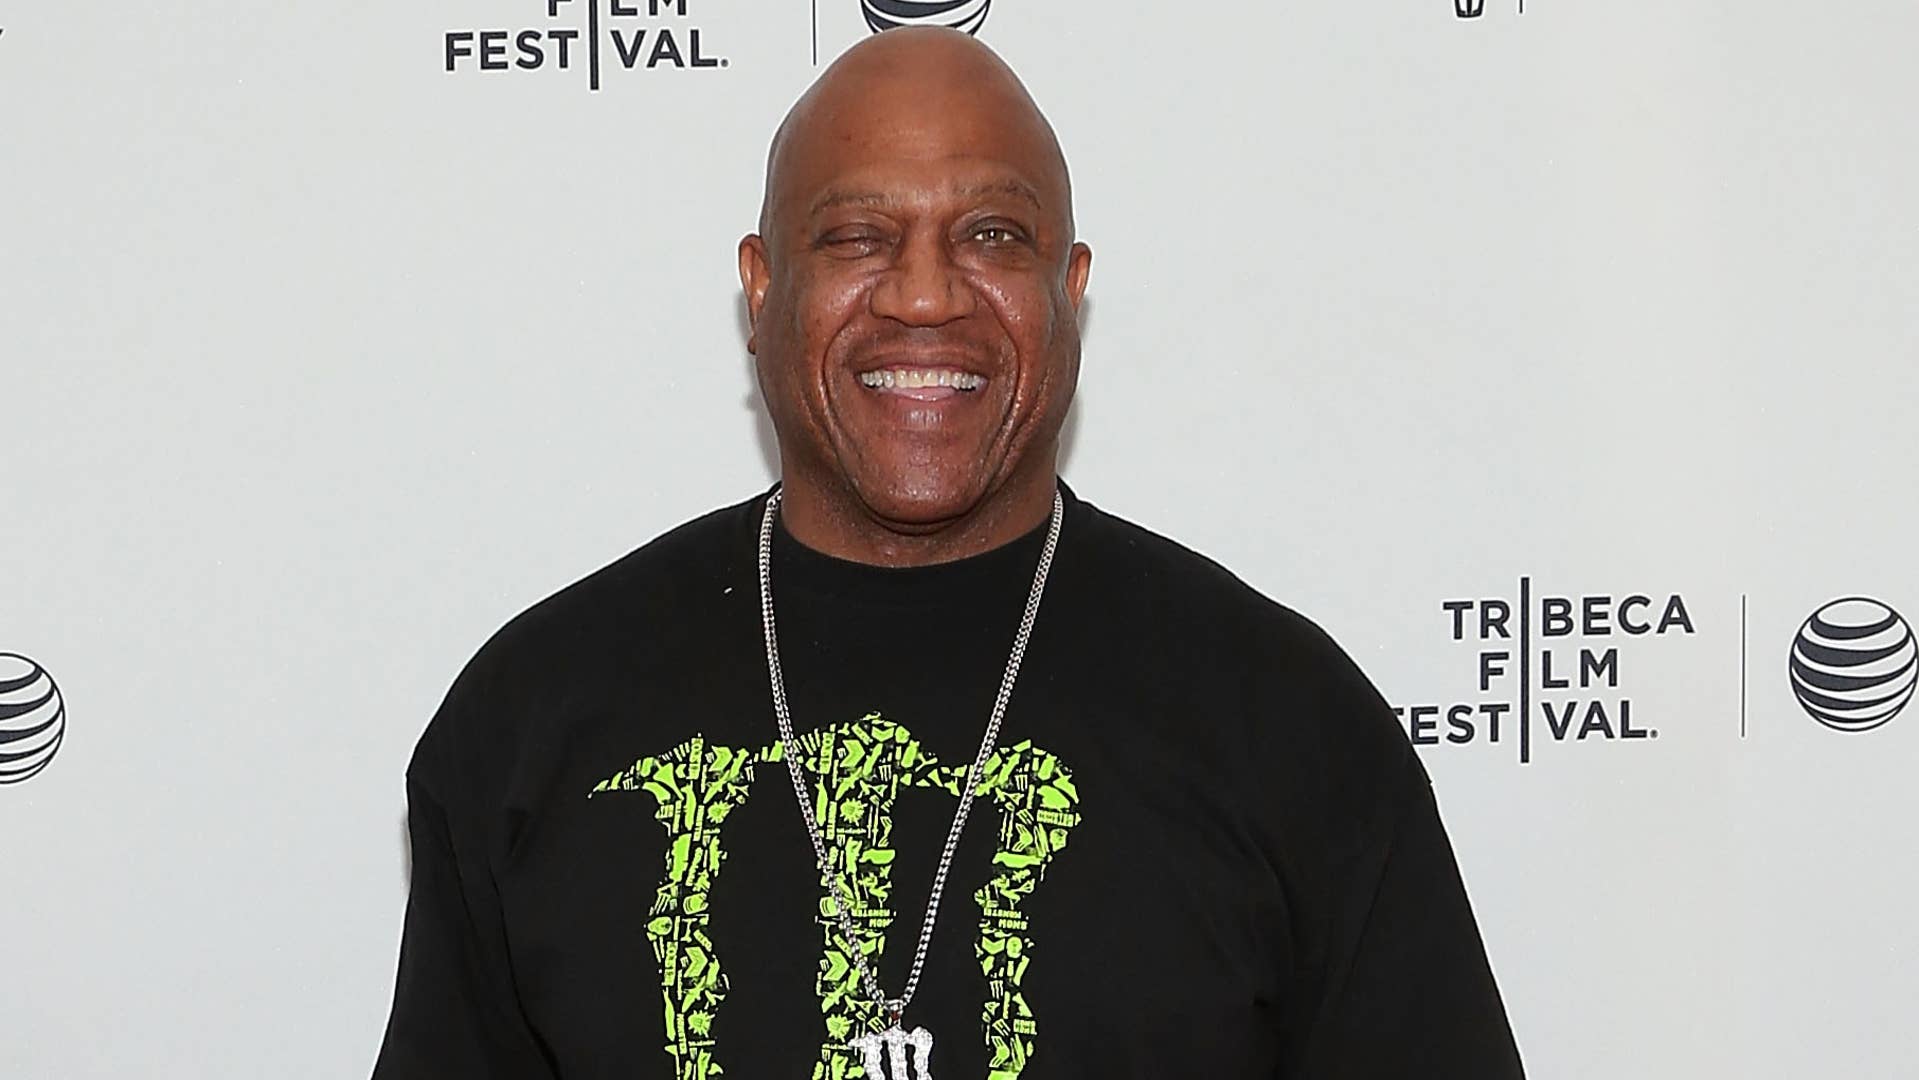 Thomas "Tiny" Lister Jr. attends the premiere of "Sister."